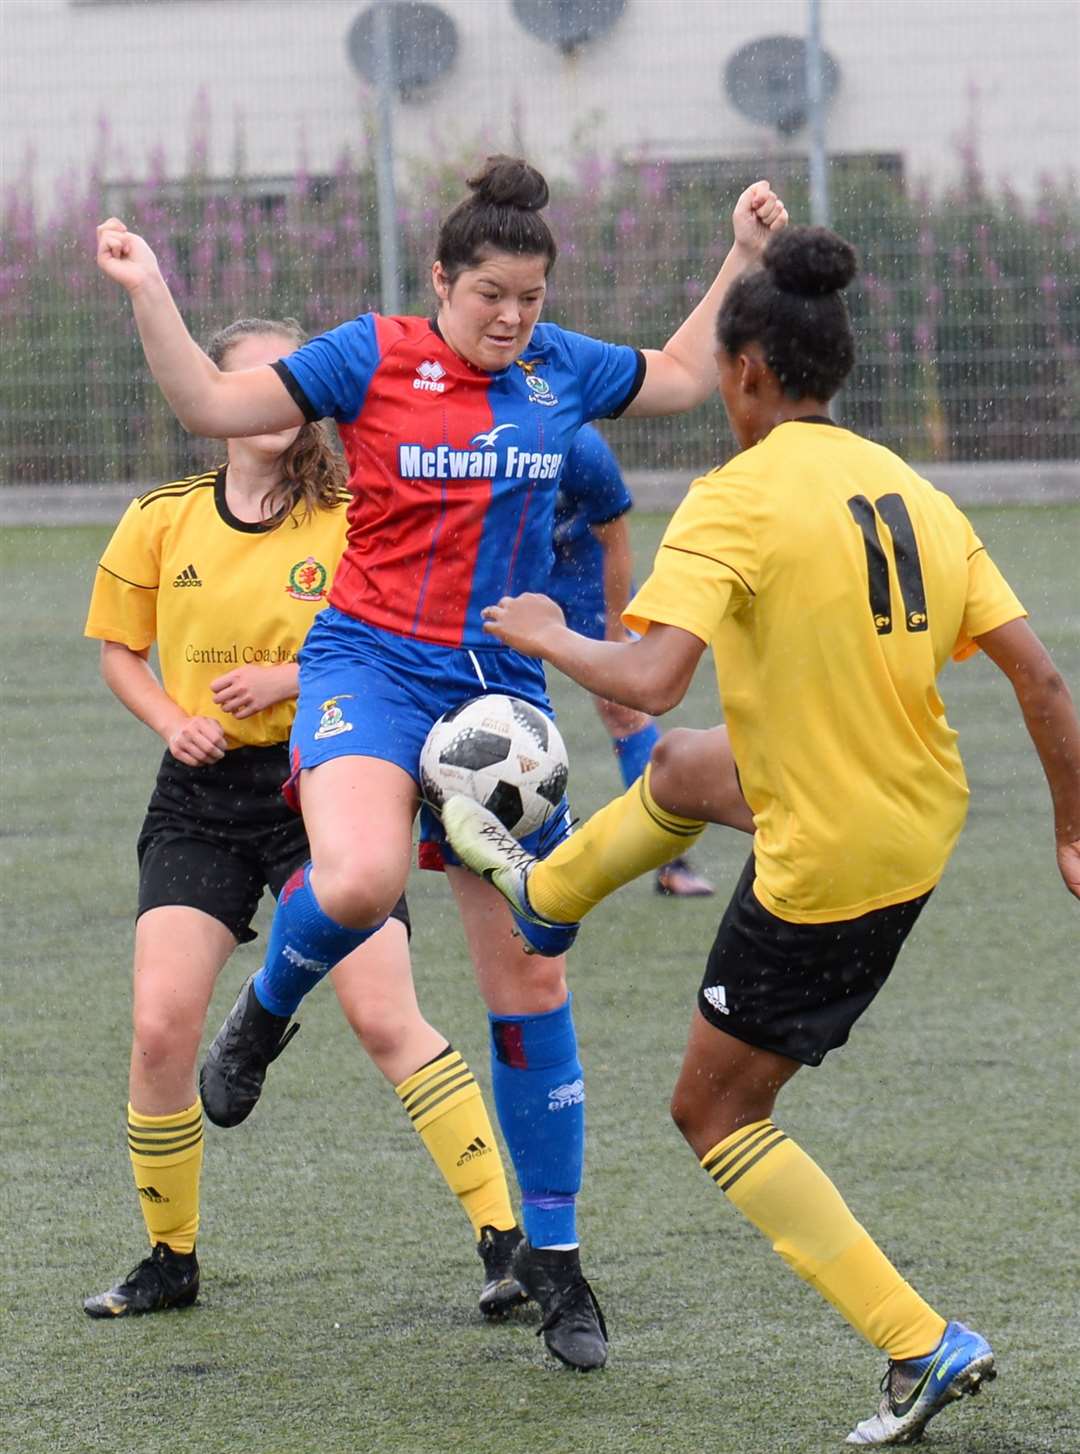 Inverness Caledonian Thistle Women finished runners-up to Aberdeen in last season's Division One North. Picture: Gary Anthony